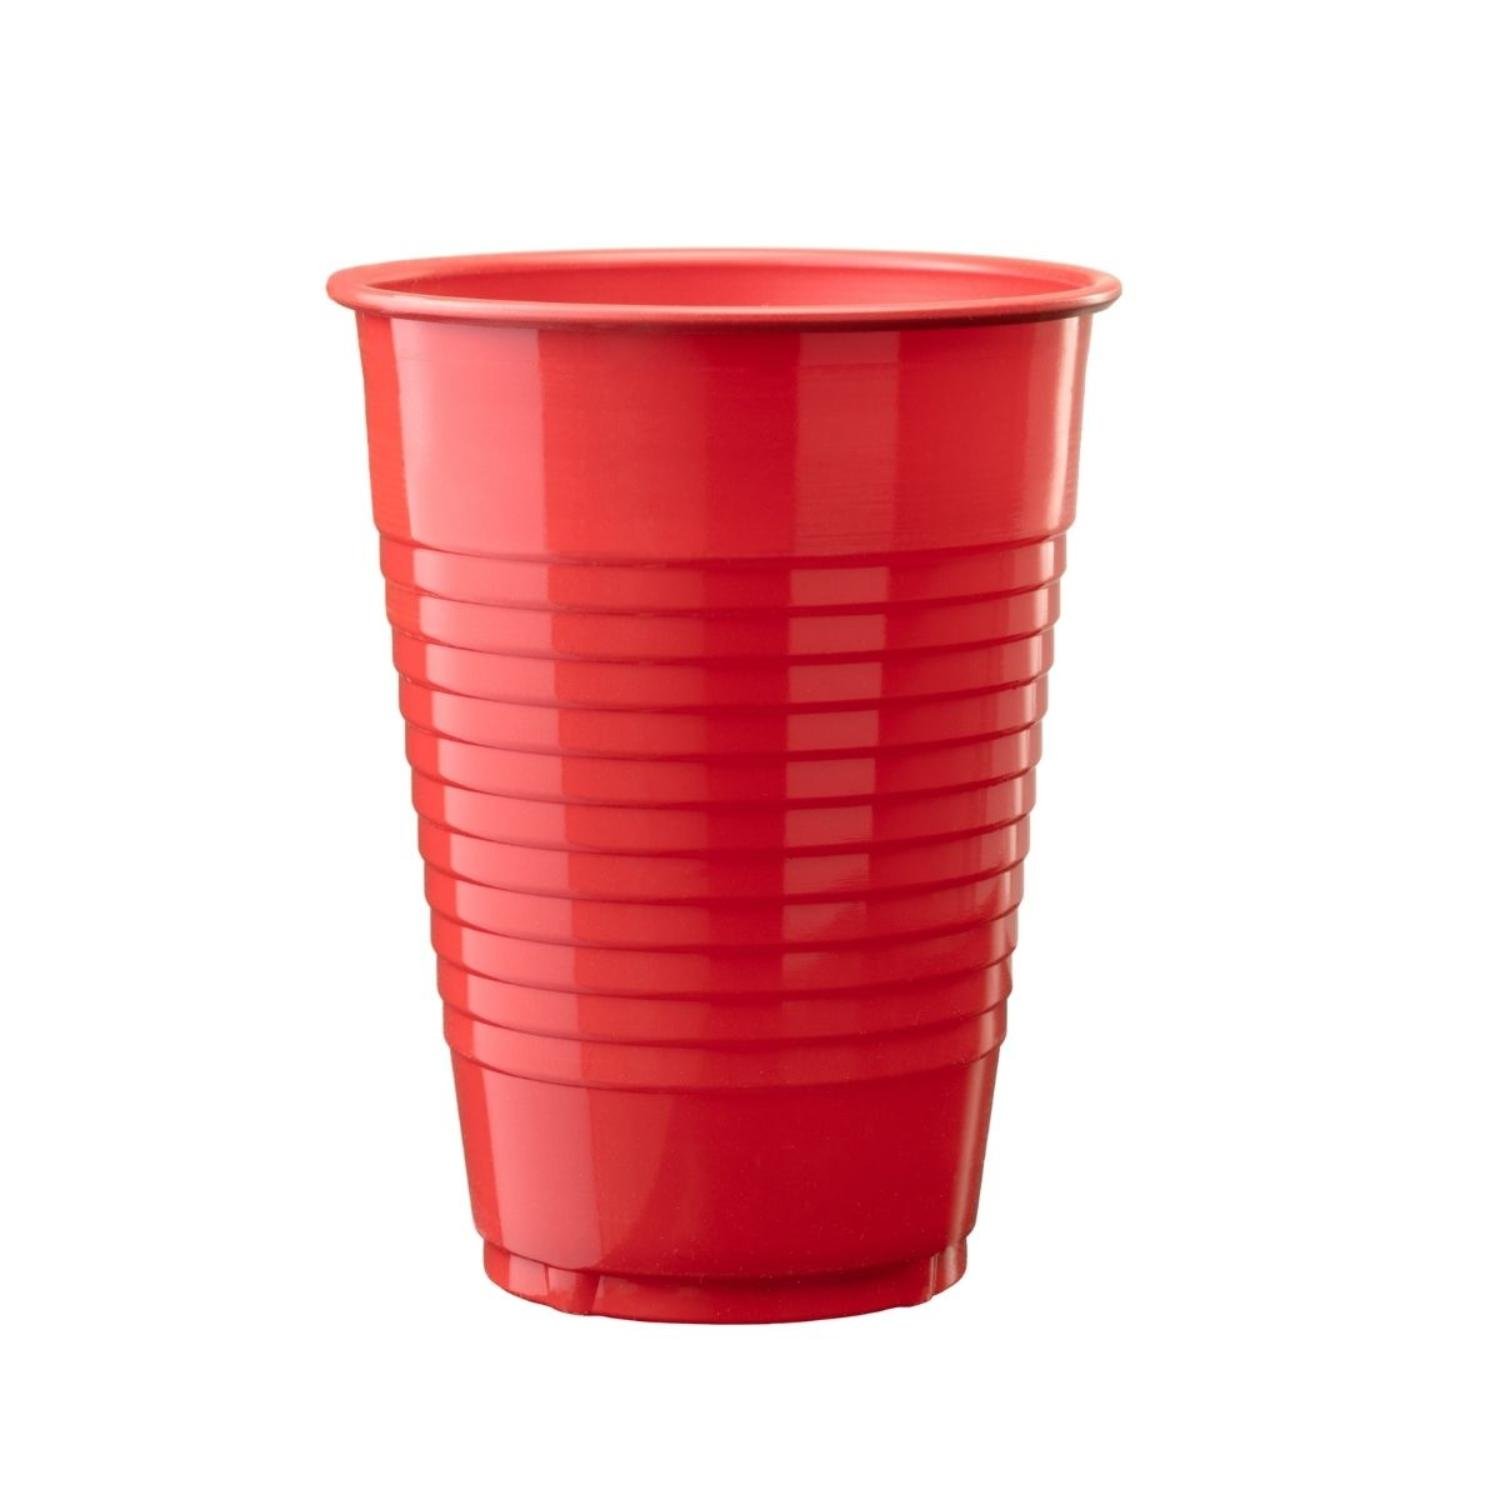 12 Oz. Red Plastic Cups - 16 Ct.